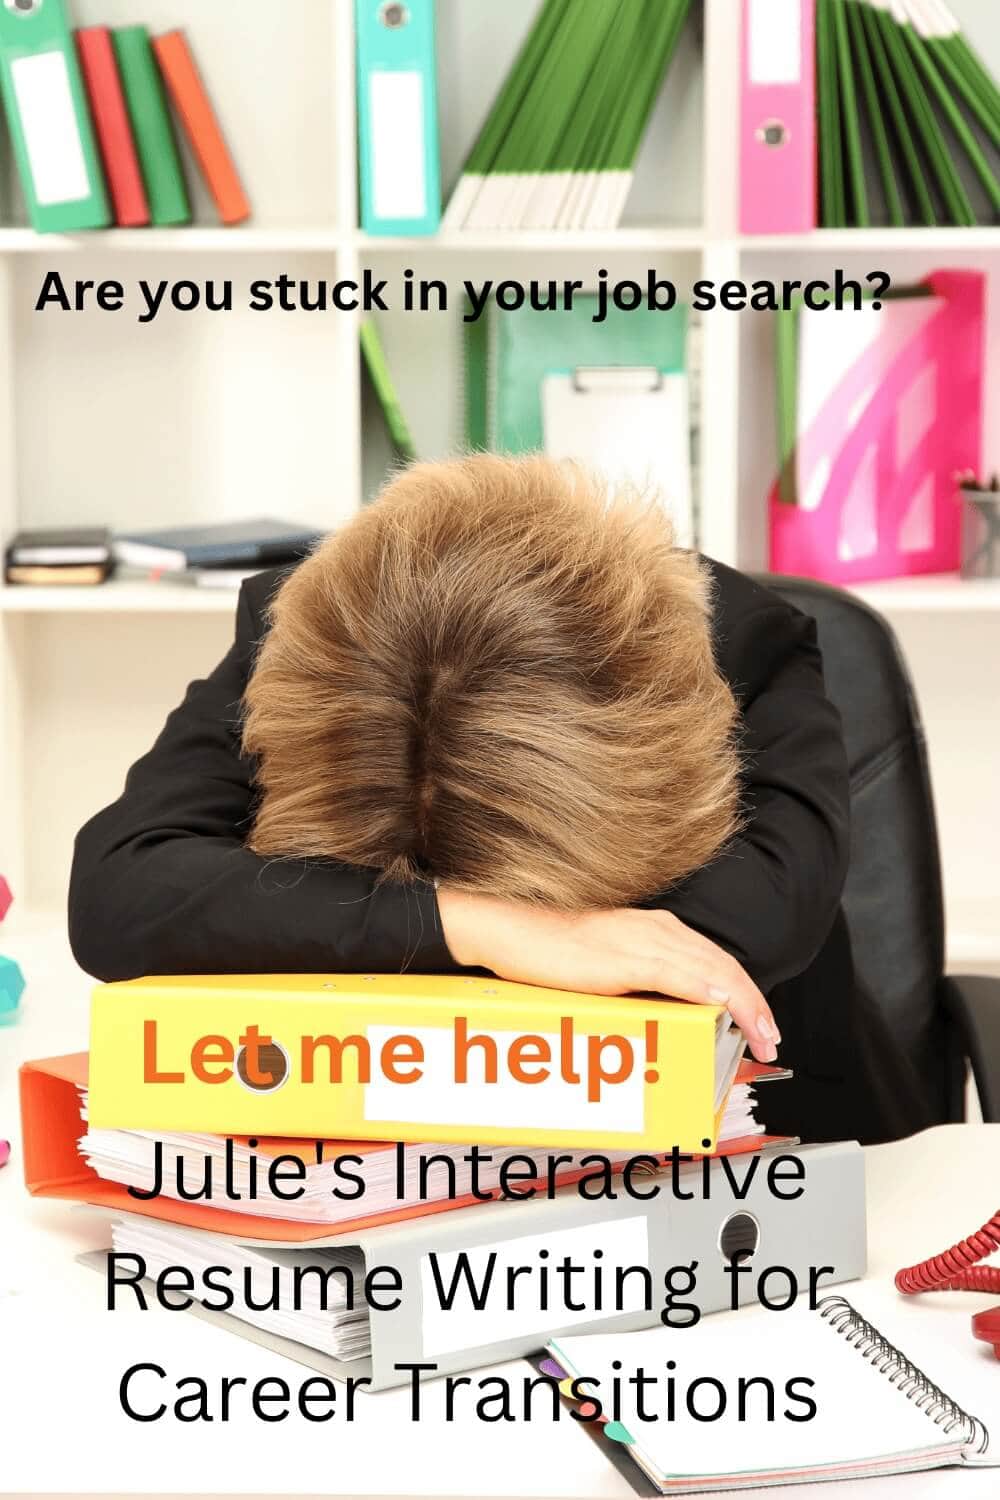 Julie Walraven: Transforming Careers with Interactive Resume Writing